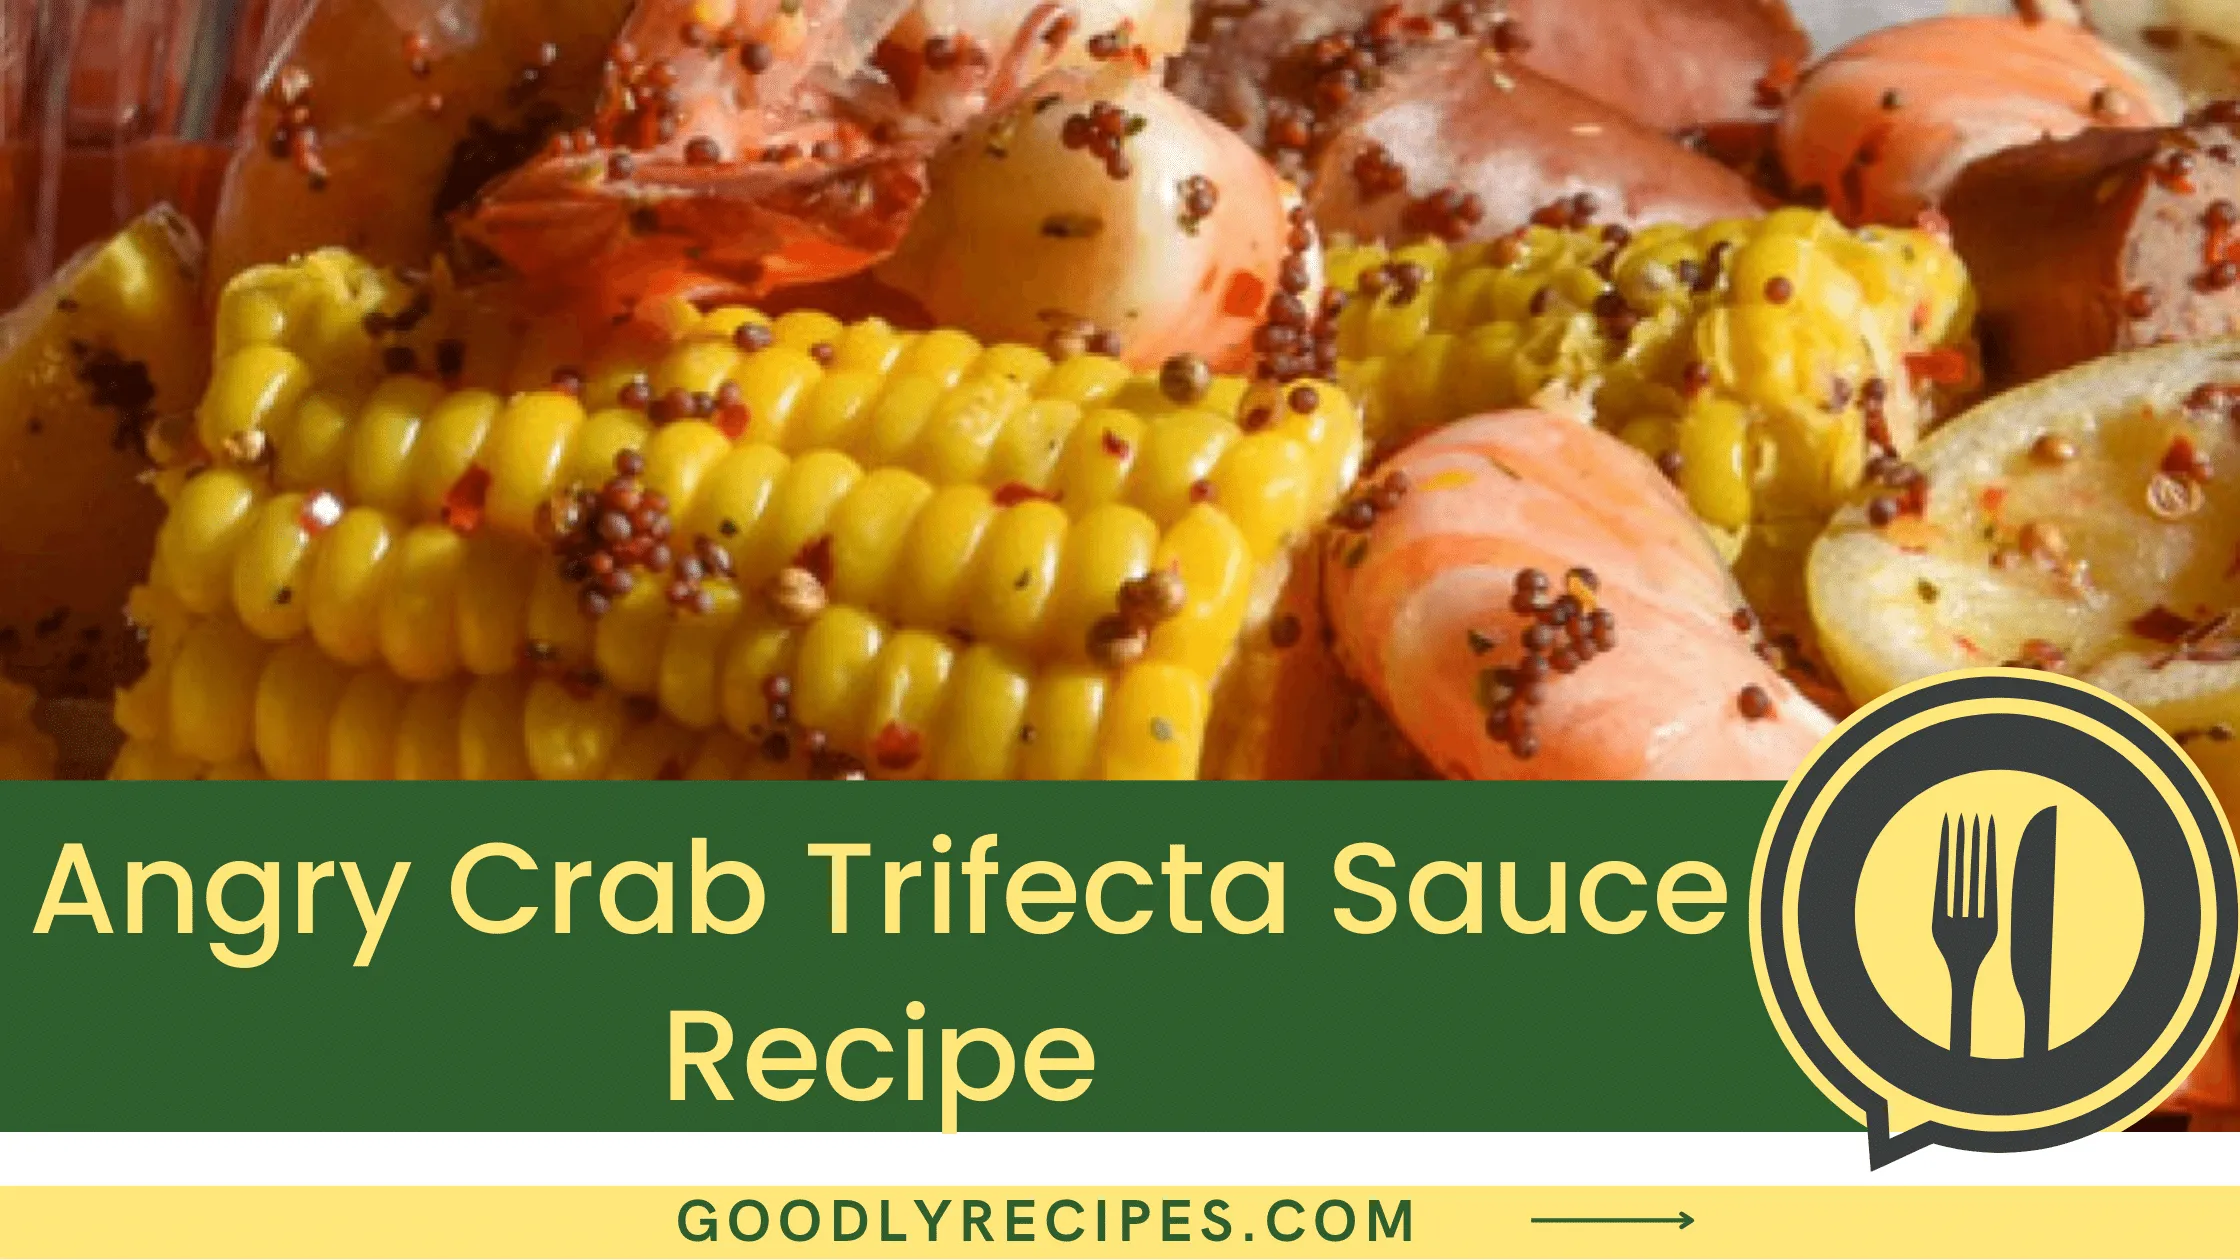 Angry Crab Trifecta Sauce Recipe - For Food Lovers